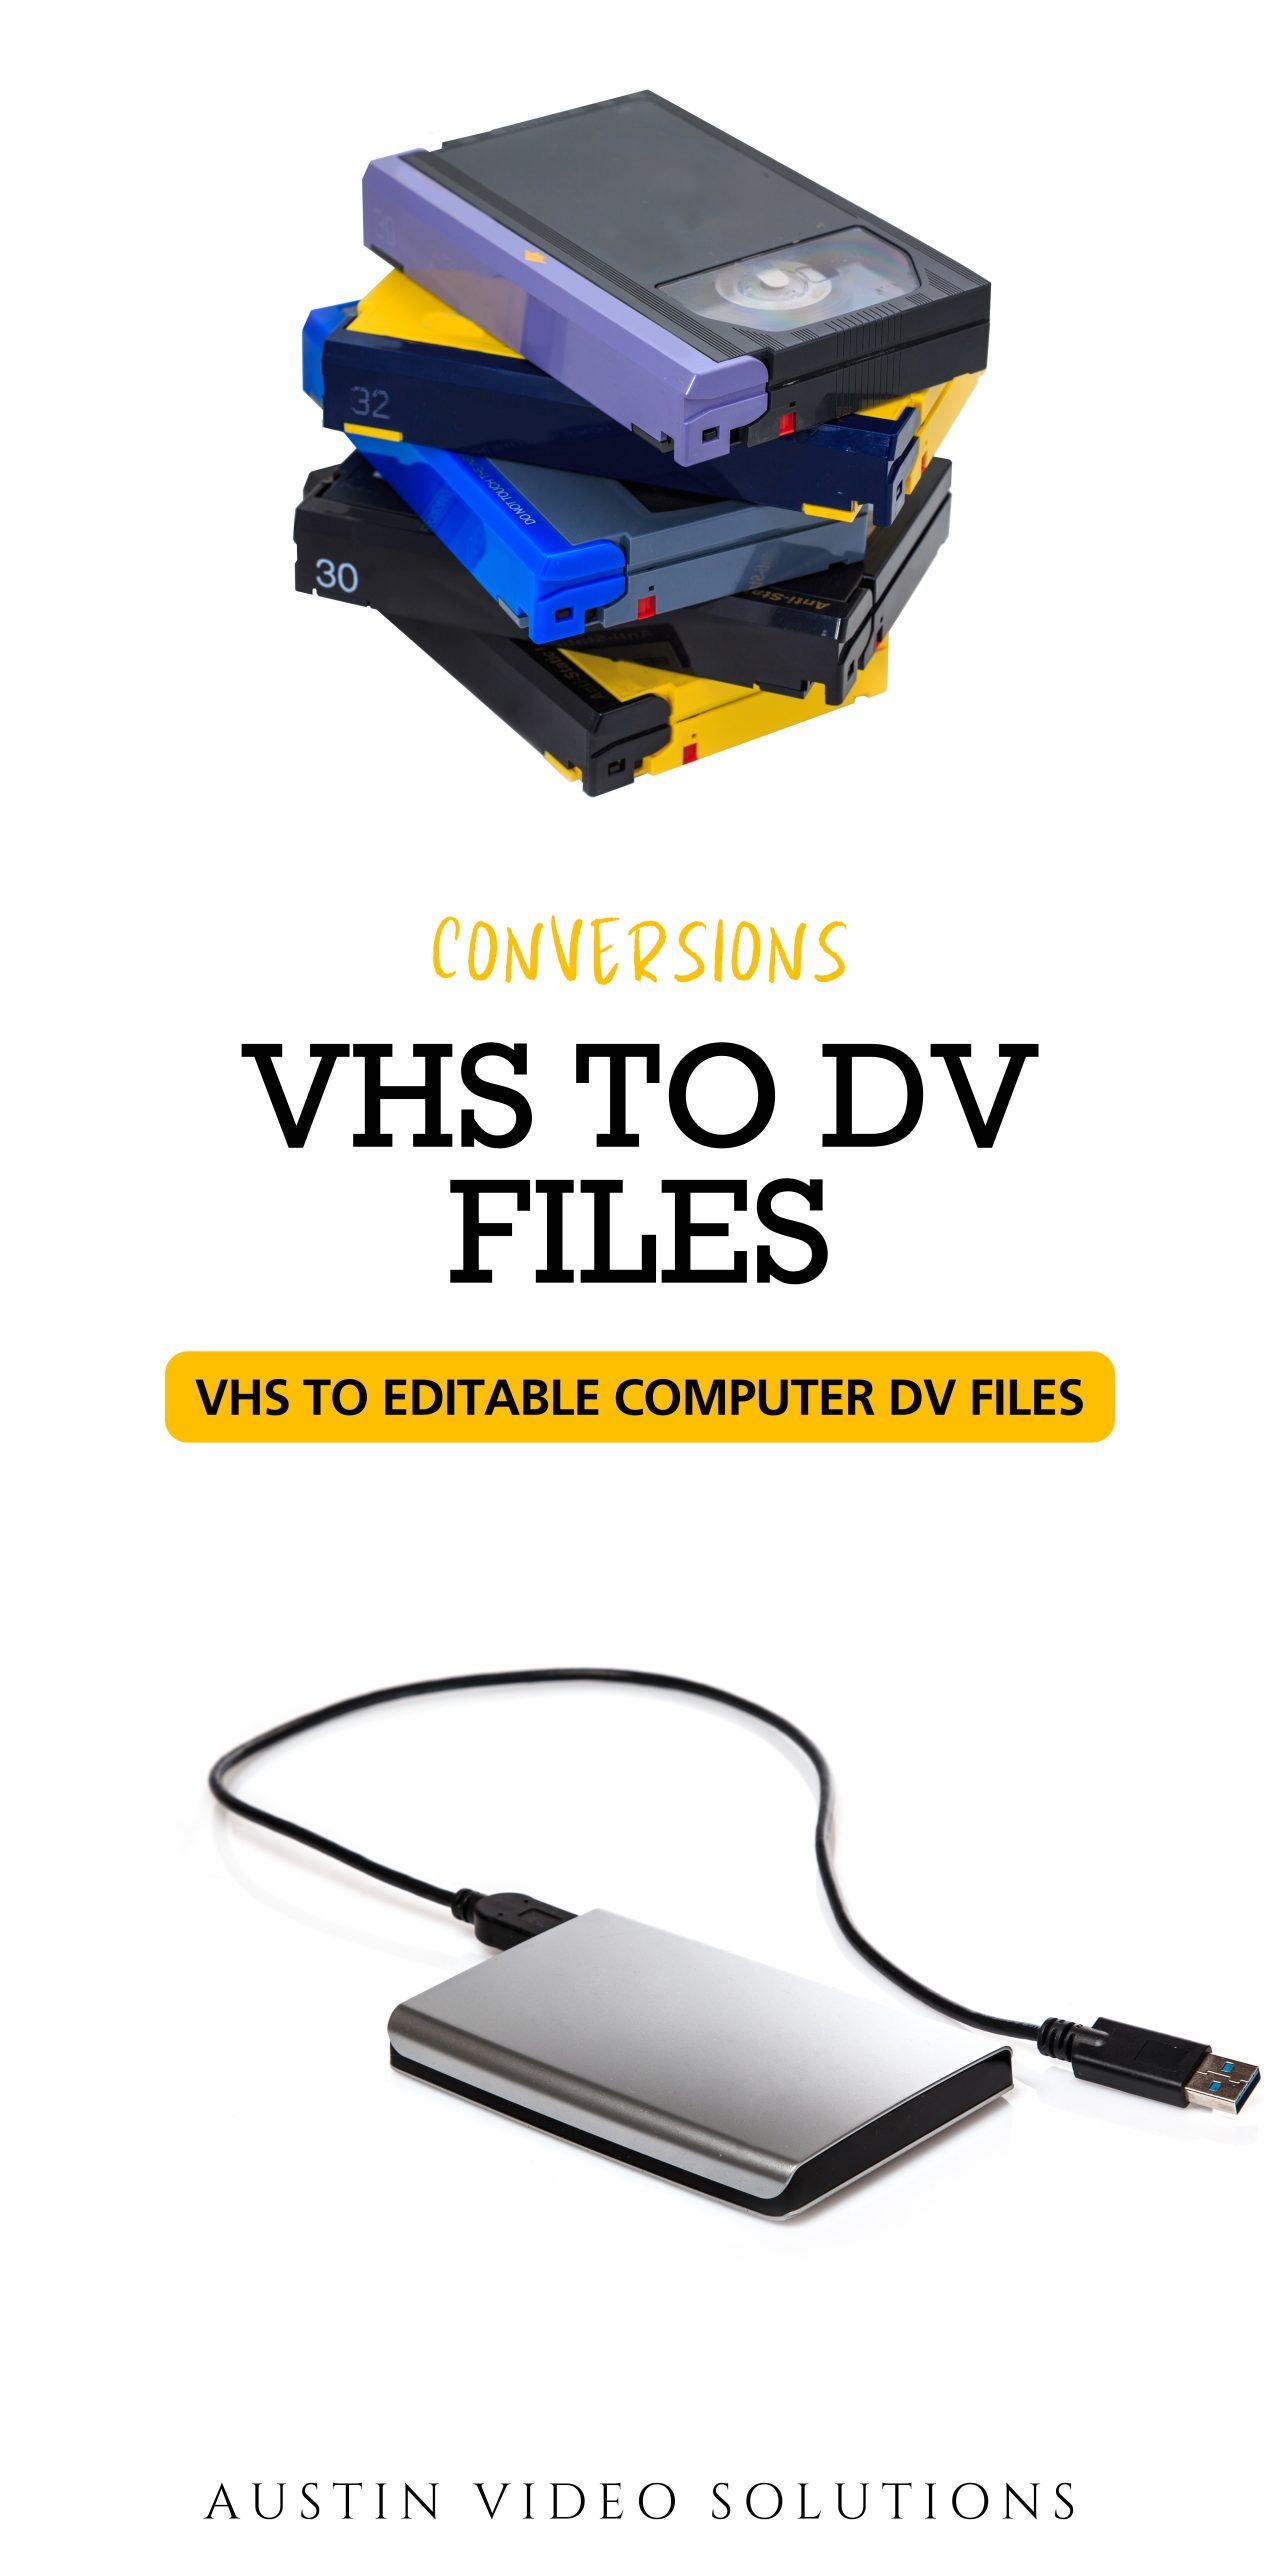 Convert your VHS tapes to high quality digital formats like DV and MP4 for easy editing, sharing, and long-term preservation. Choose from convenient storage options like hard drives or thumb drives.